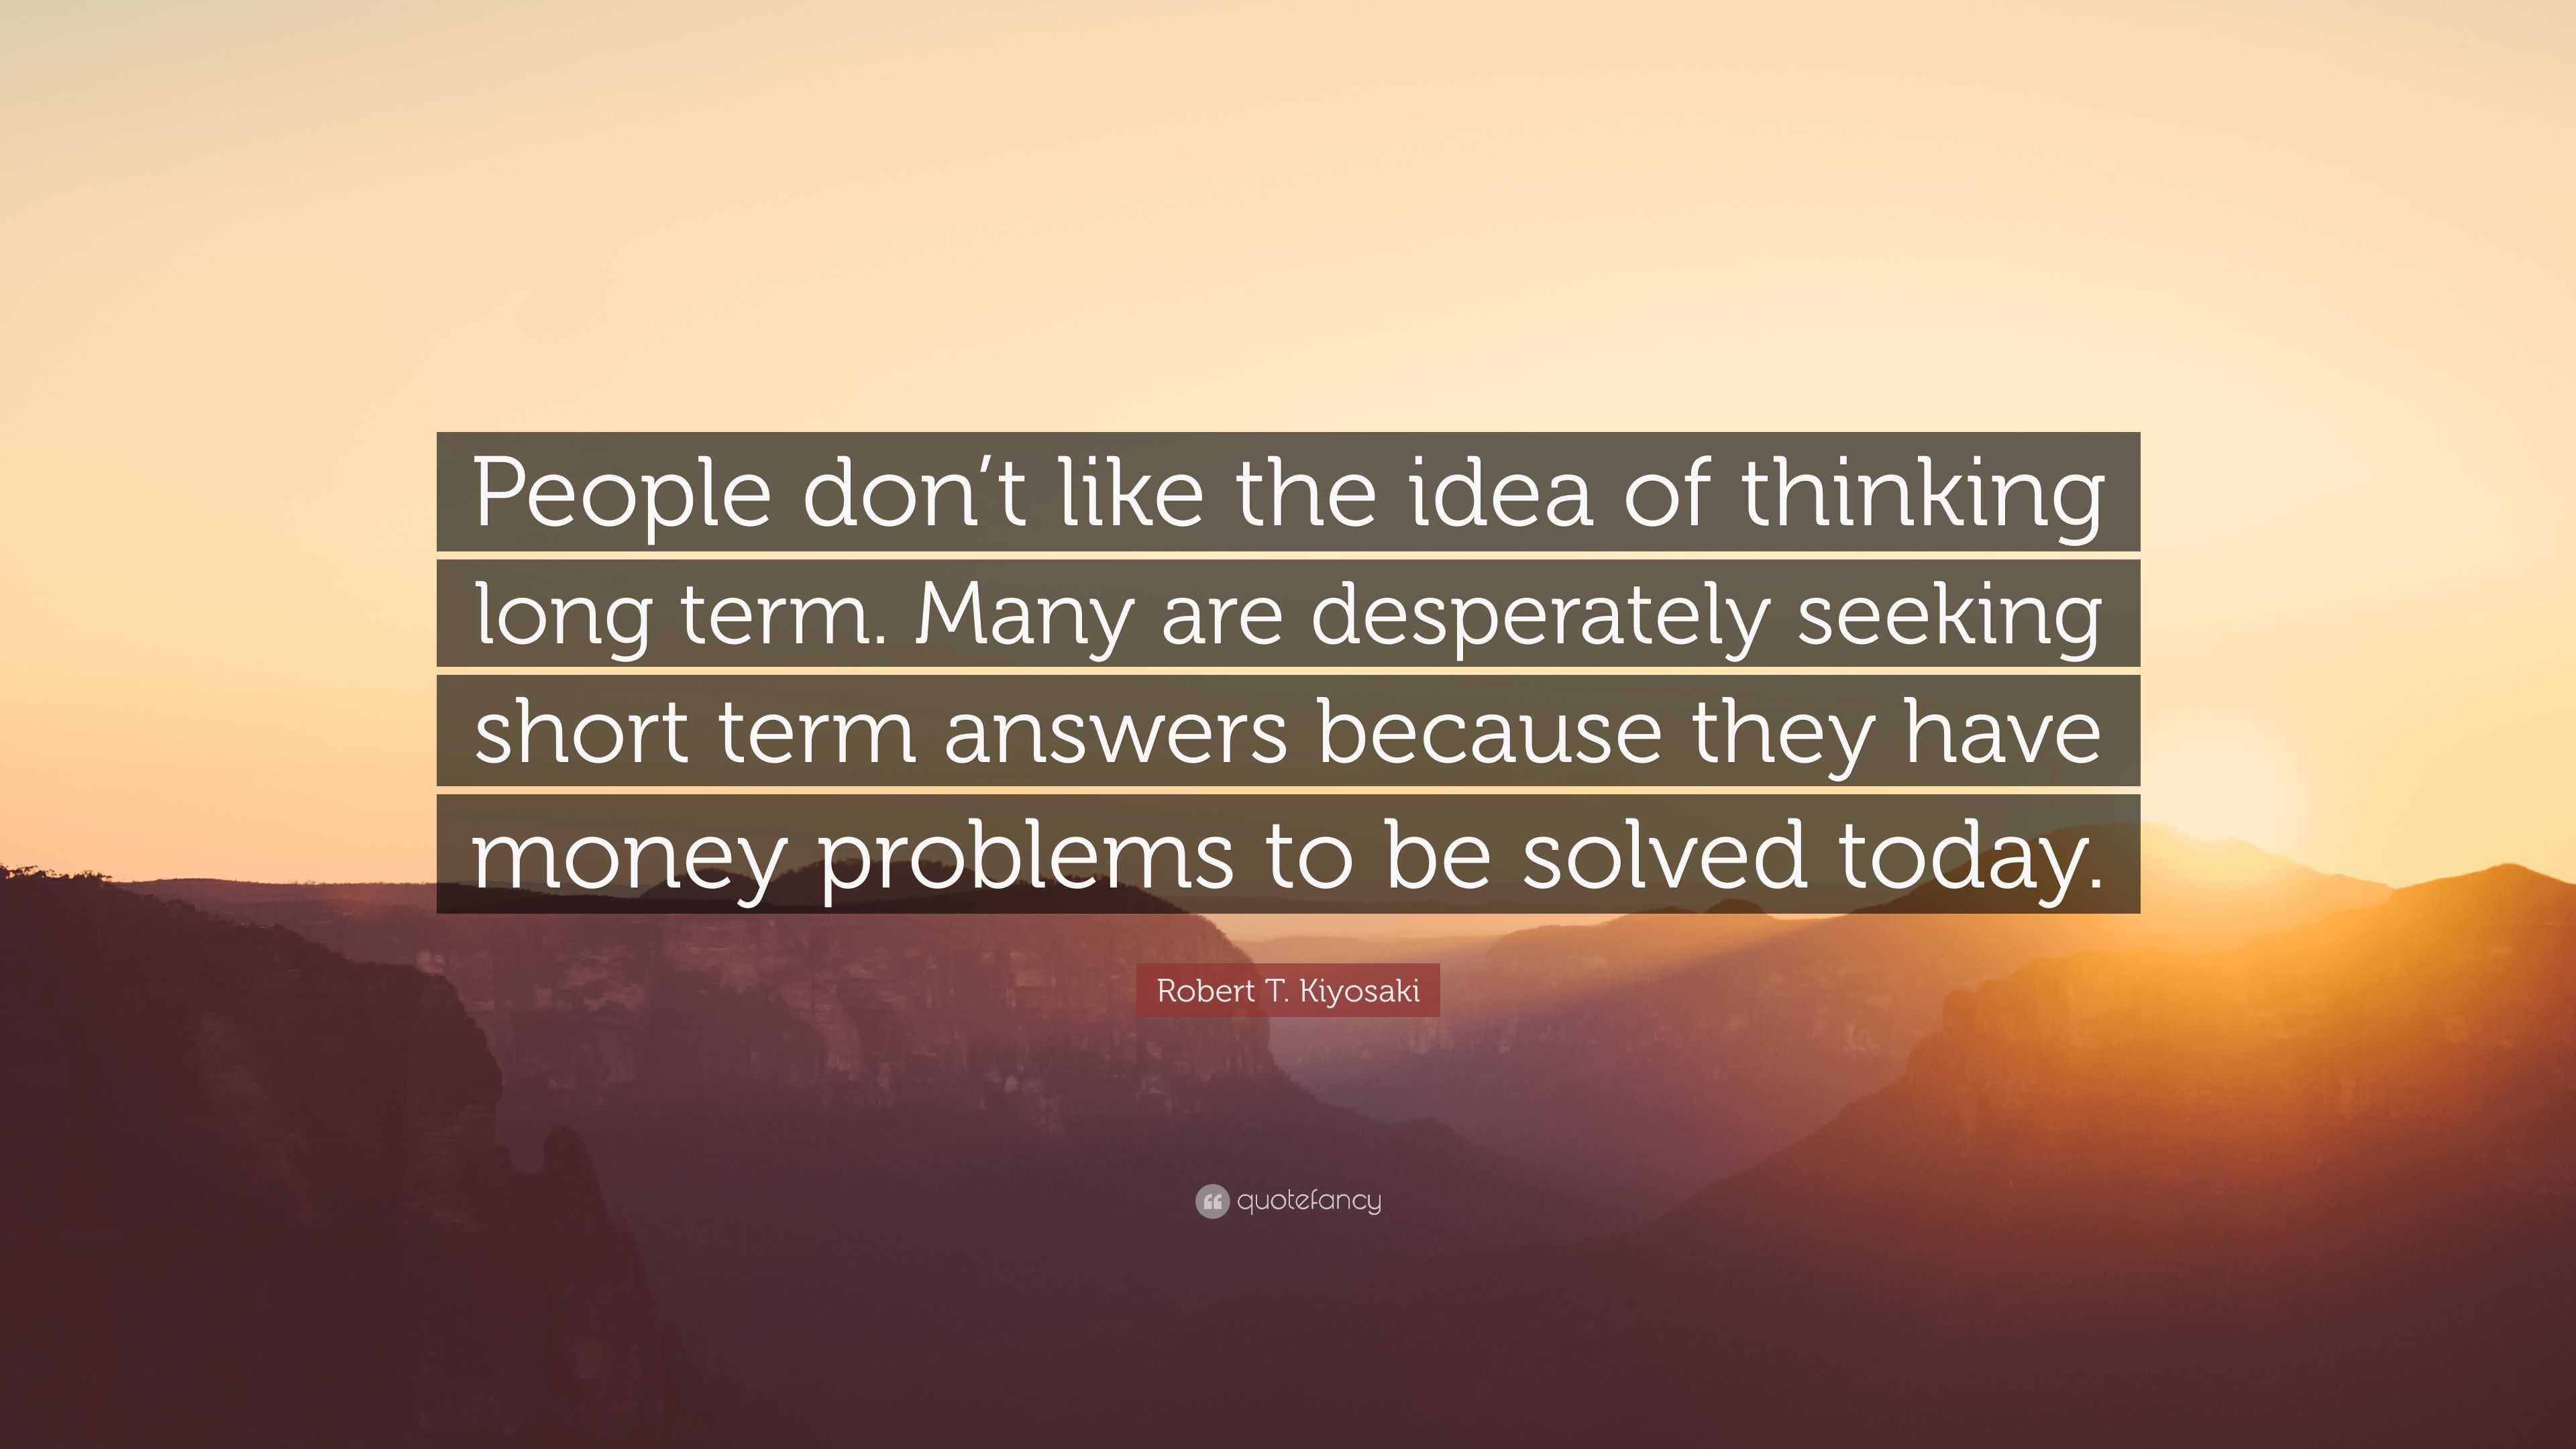 Robert T. Kiyosaki Quote: “A job is a short term solution to a